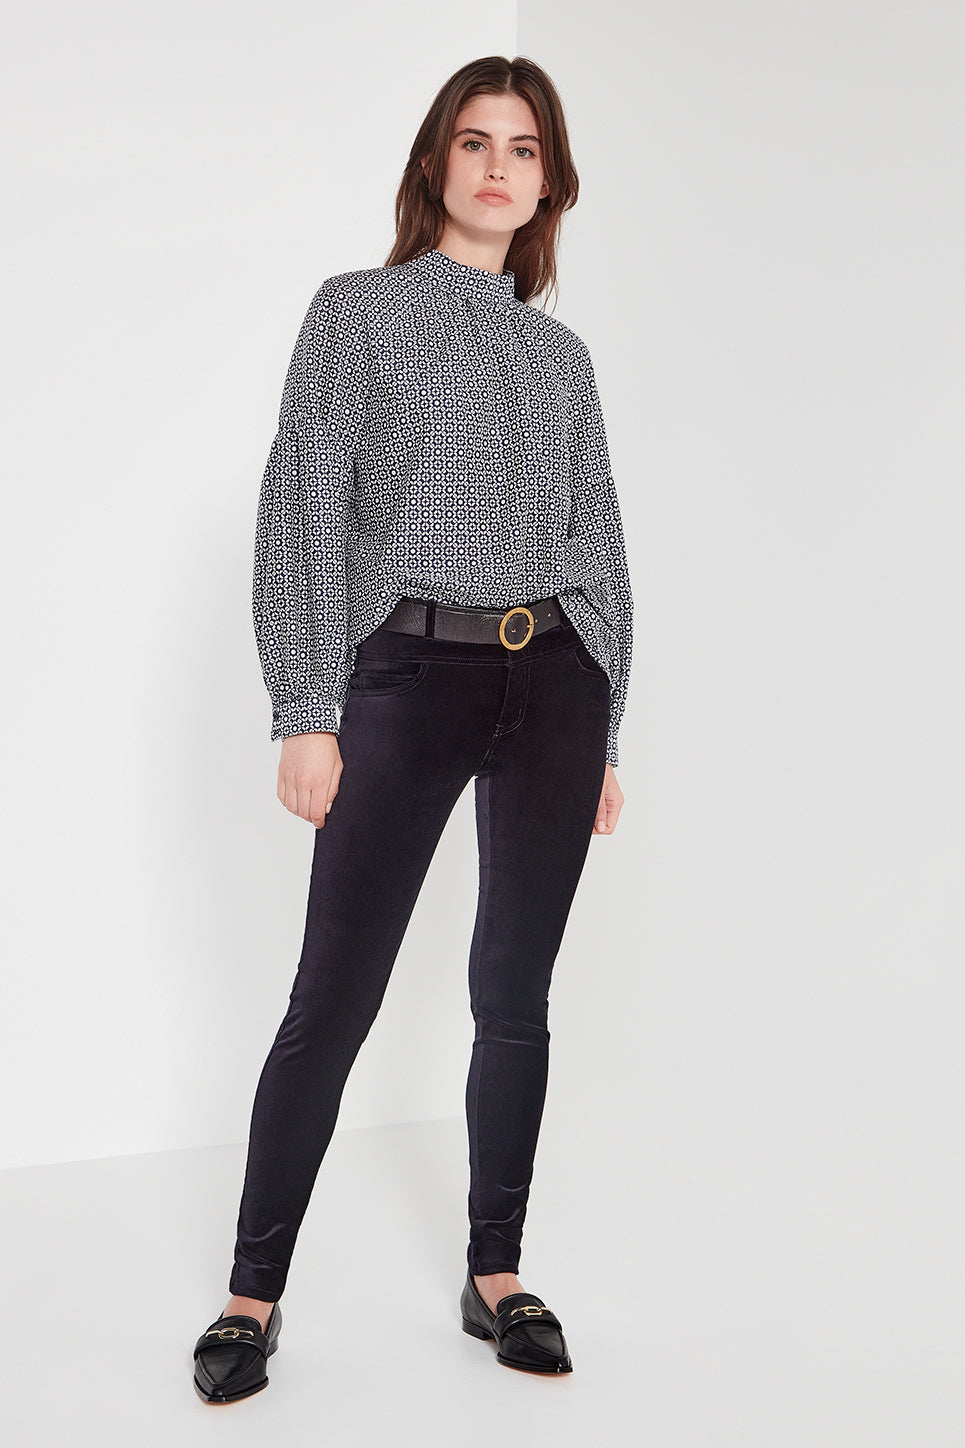 The Malo Jean in Navy